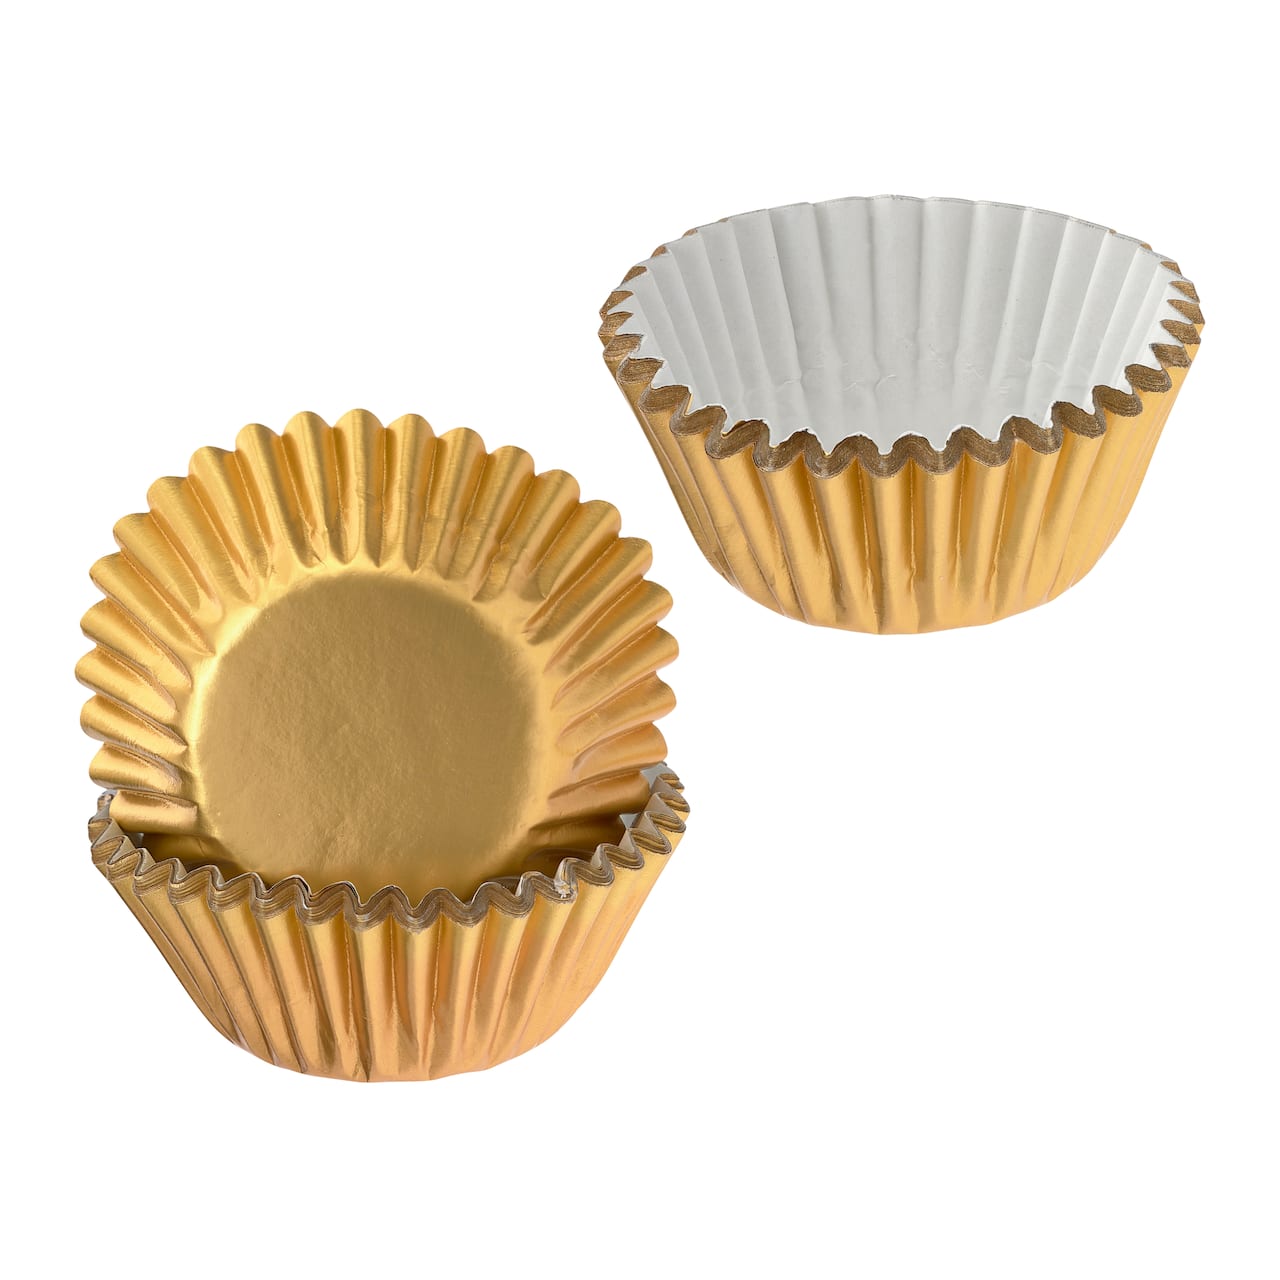 Mini Foil Baking Cups by Celebrate It 75ct. in Gold | Michaels